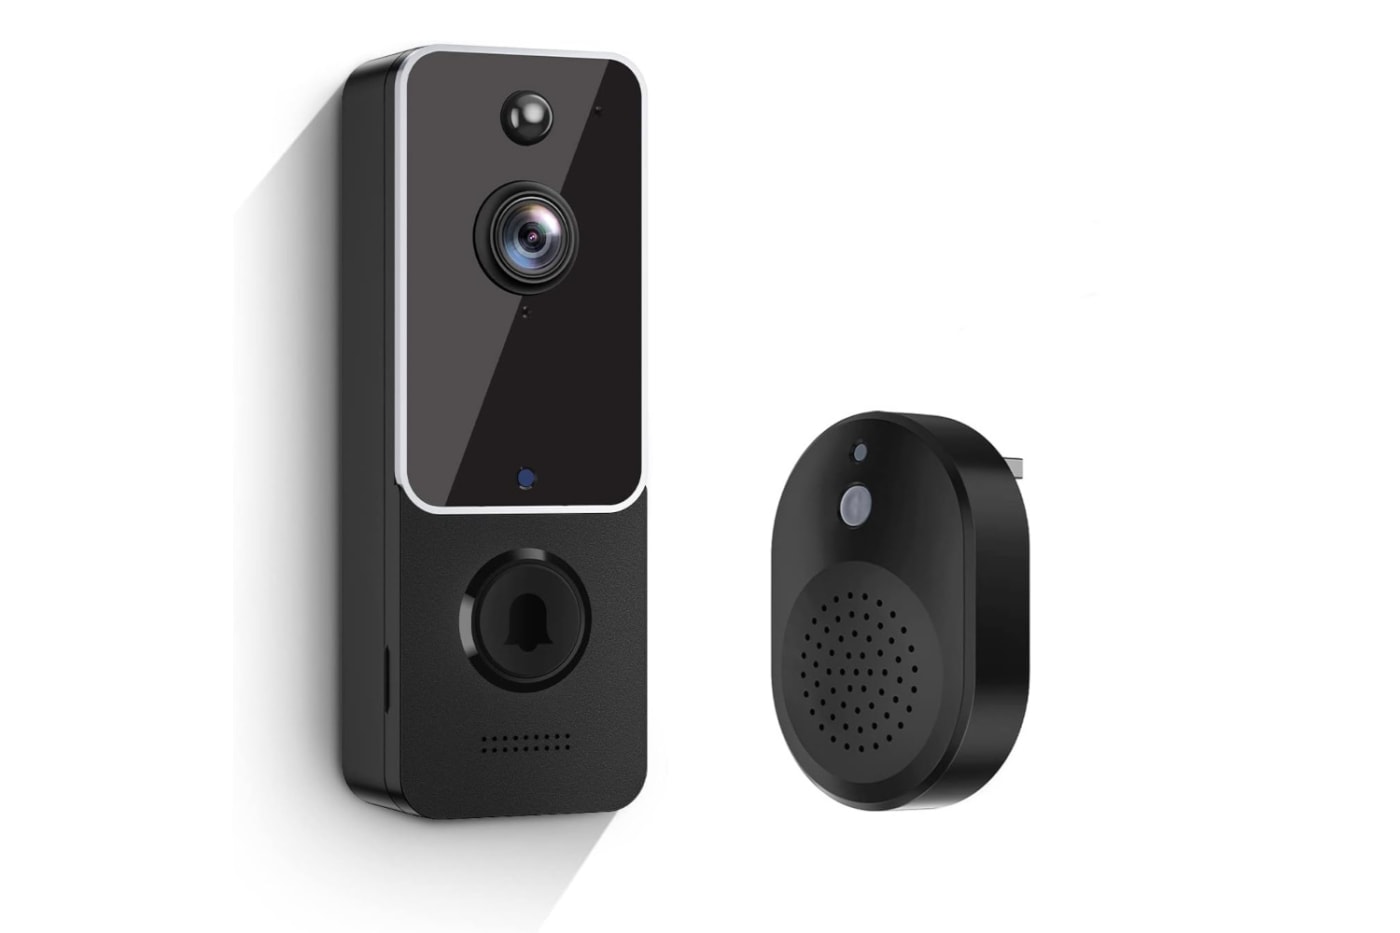 Surprise, this $30 video doorbell has serious security issues